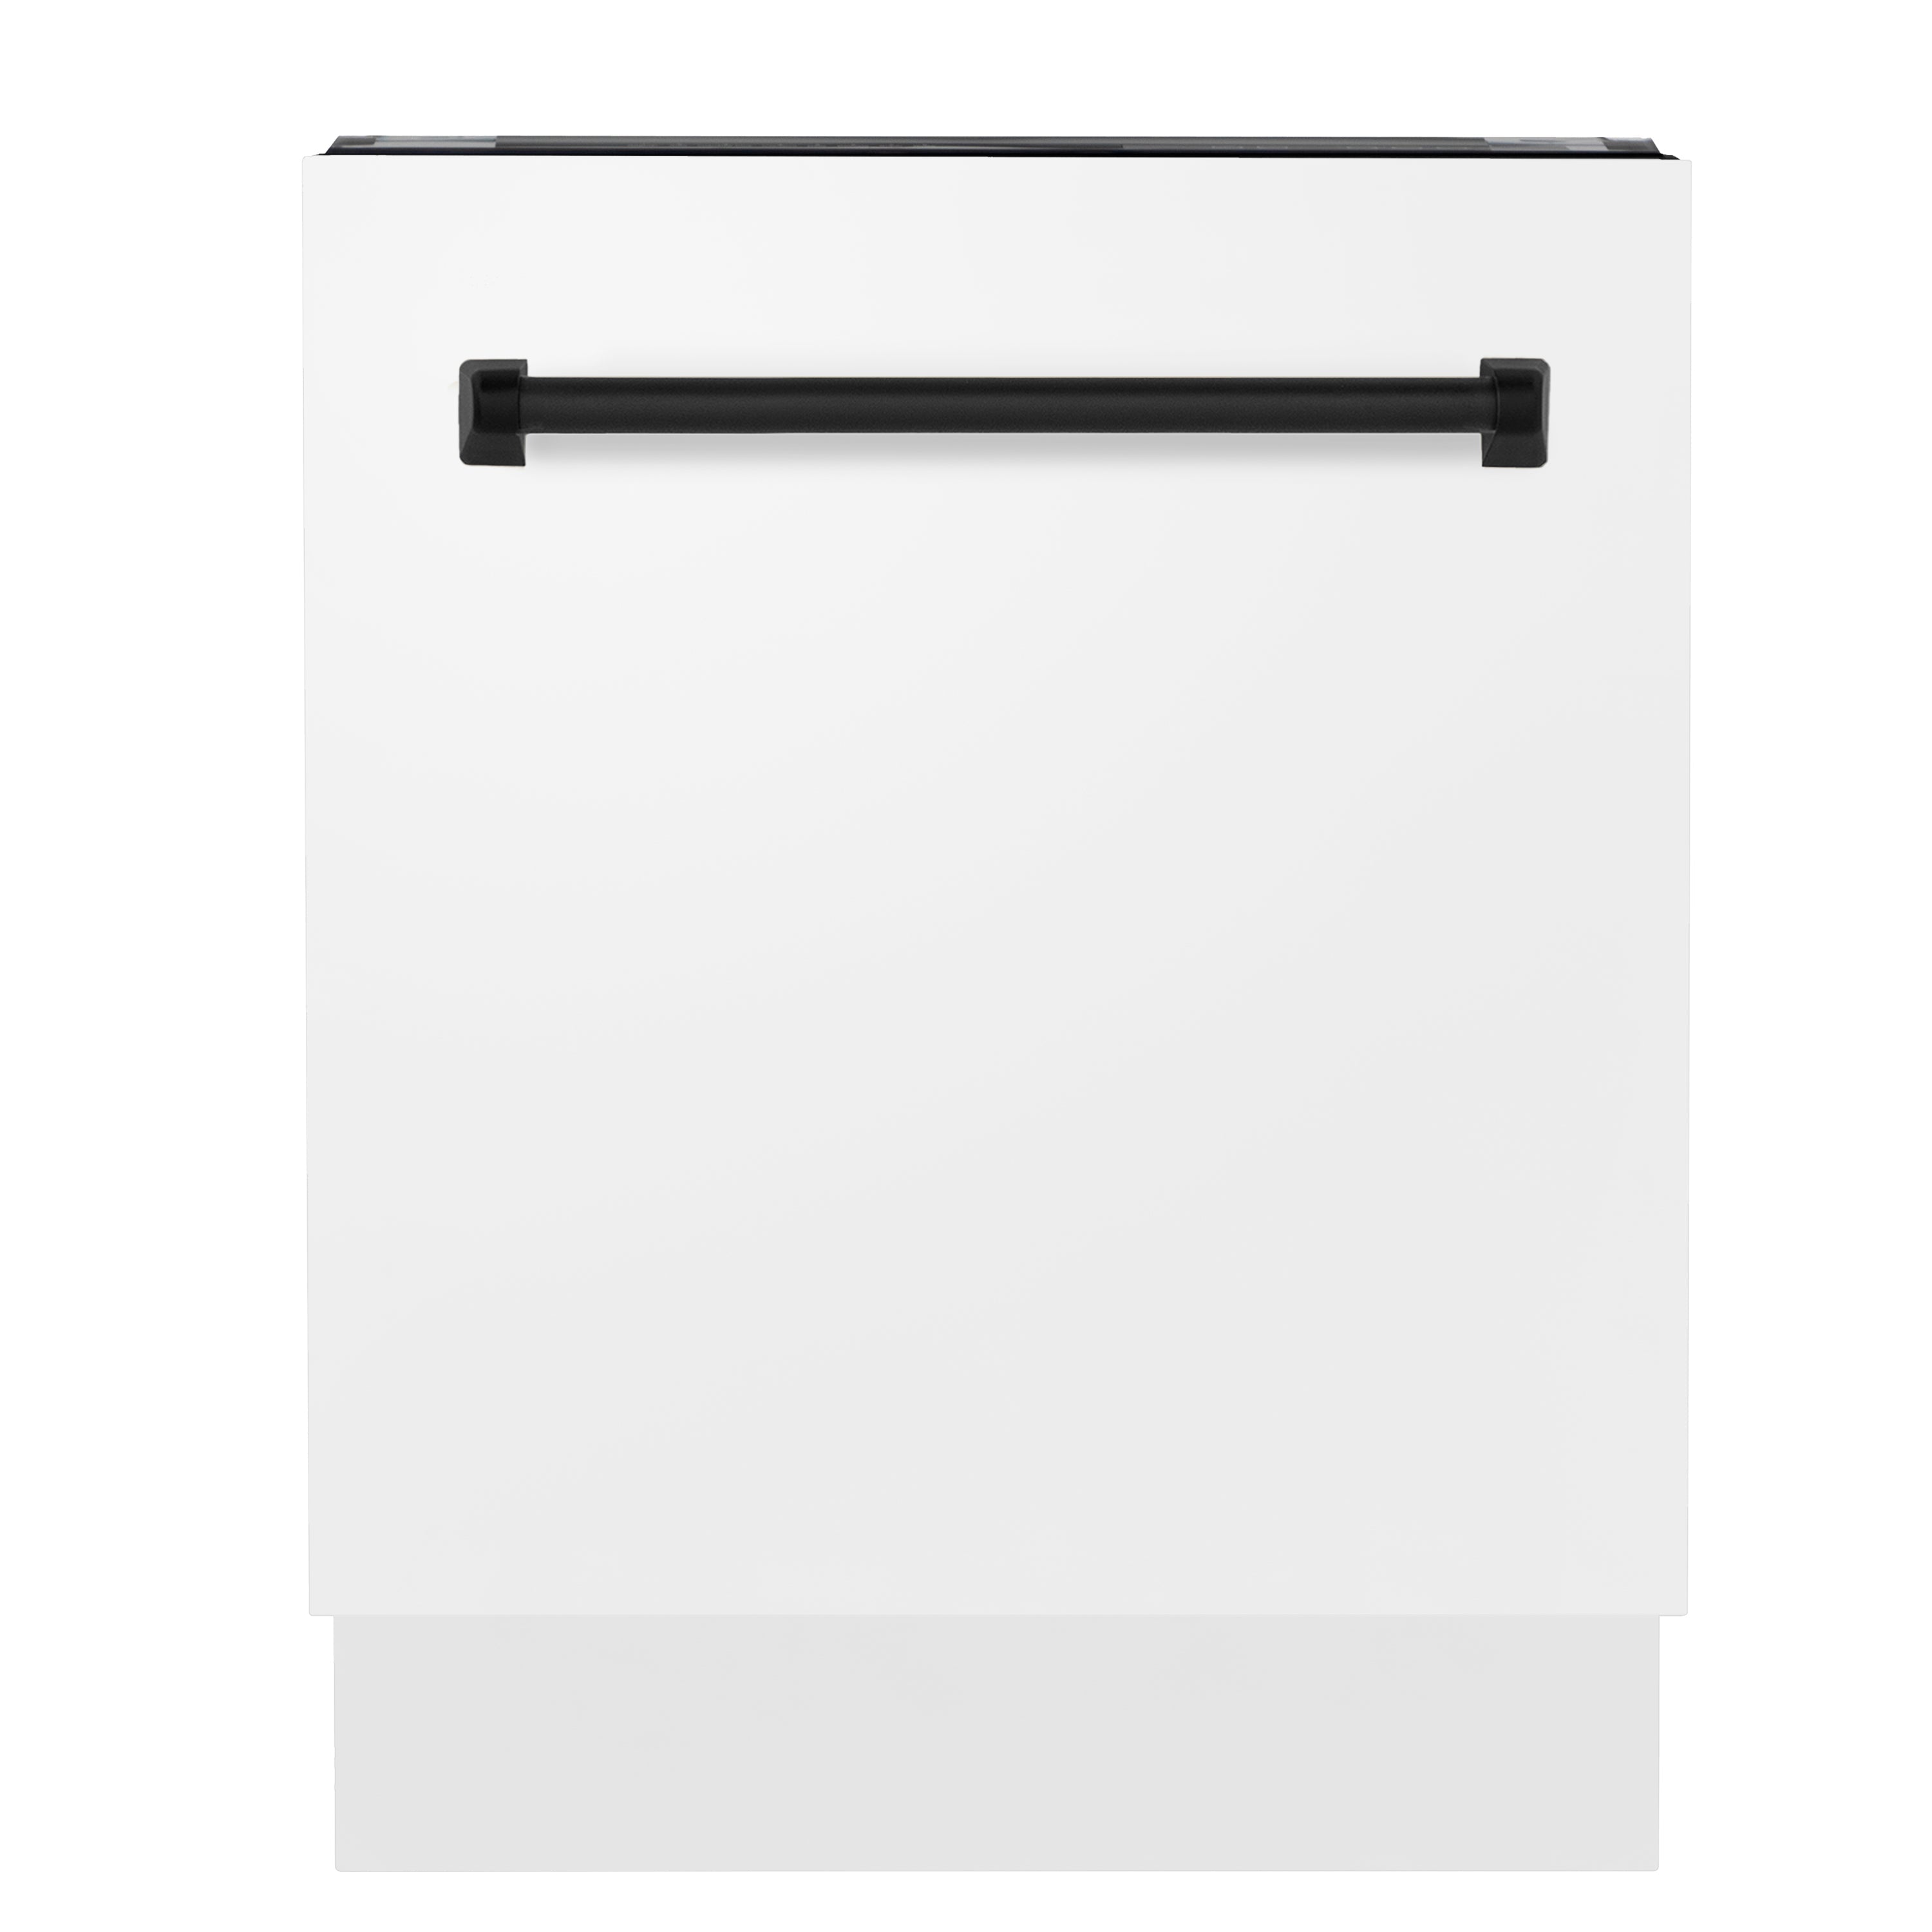 ZLINE Autograph Edition 24" 3rd Rack Top Control Tall Tub Dishwasher in White Matte with Matte Black Handle, 51dBa (DWVZ-WM-24-MB)